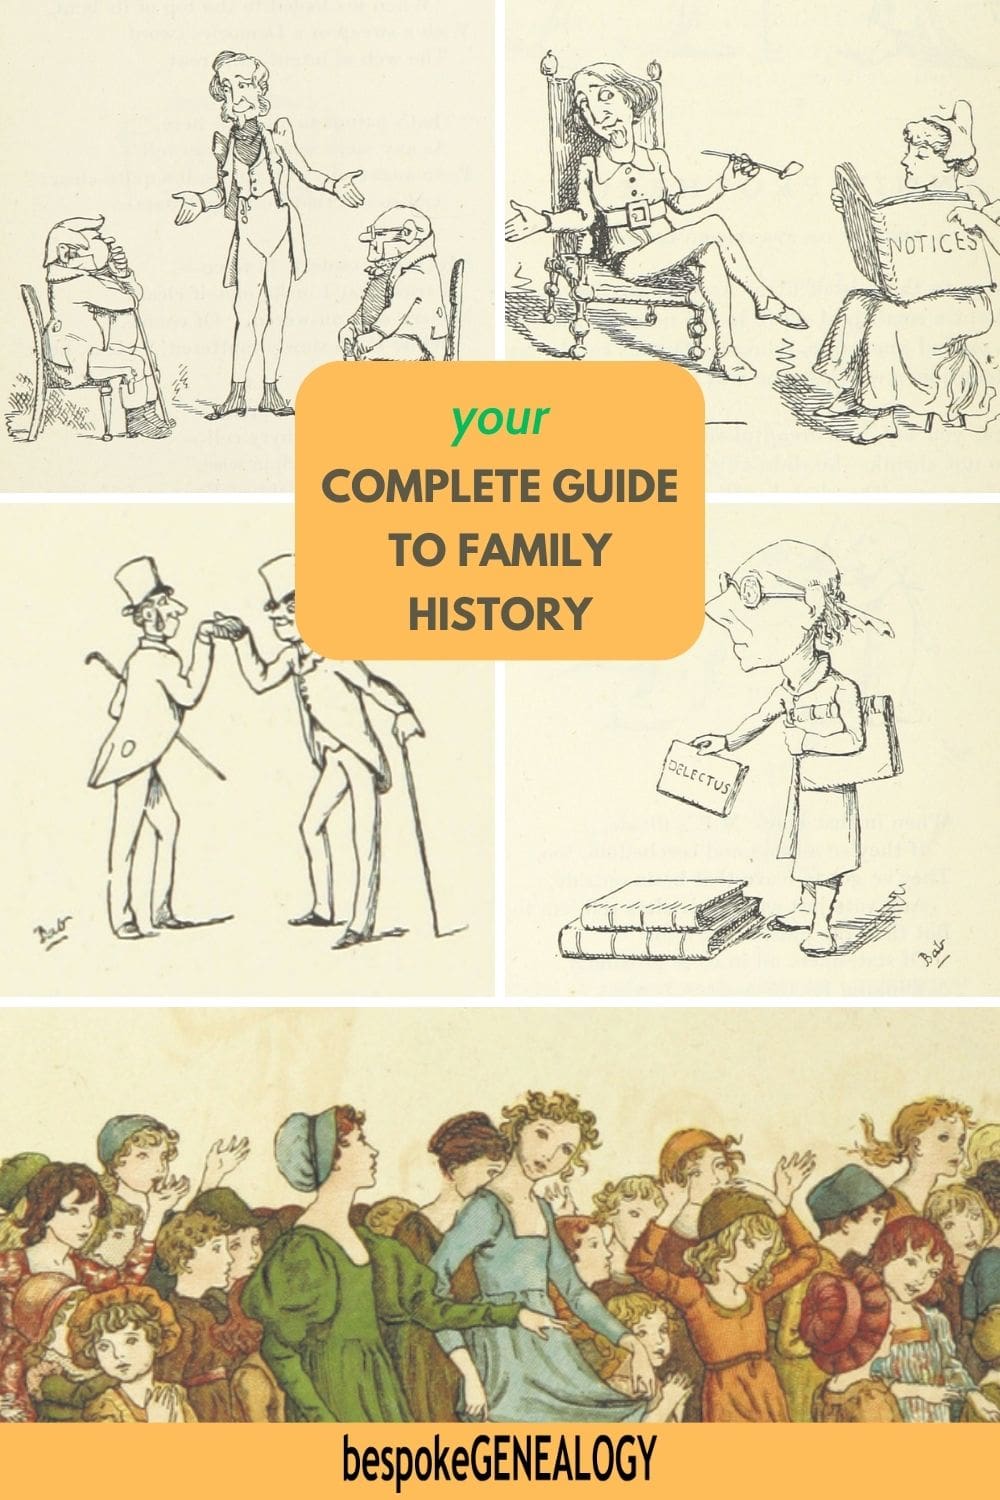 Your complete guide to family history. Images of 19th century cartoons depicting various middle class people.